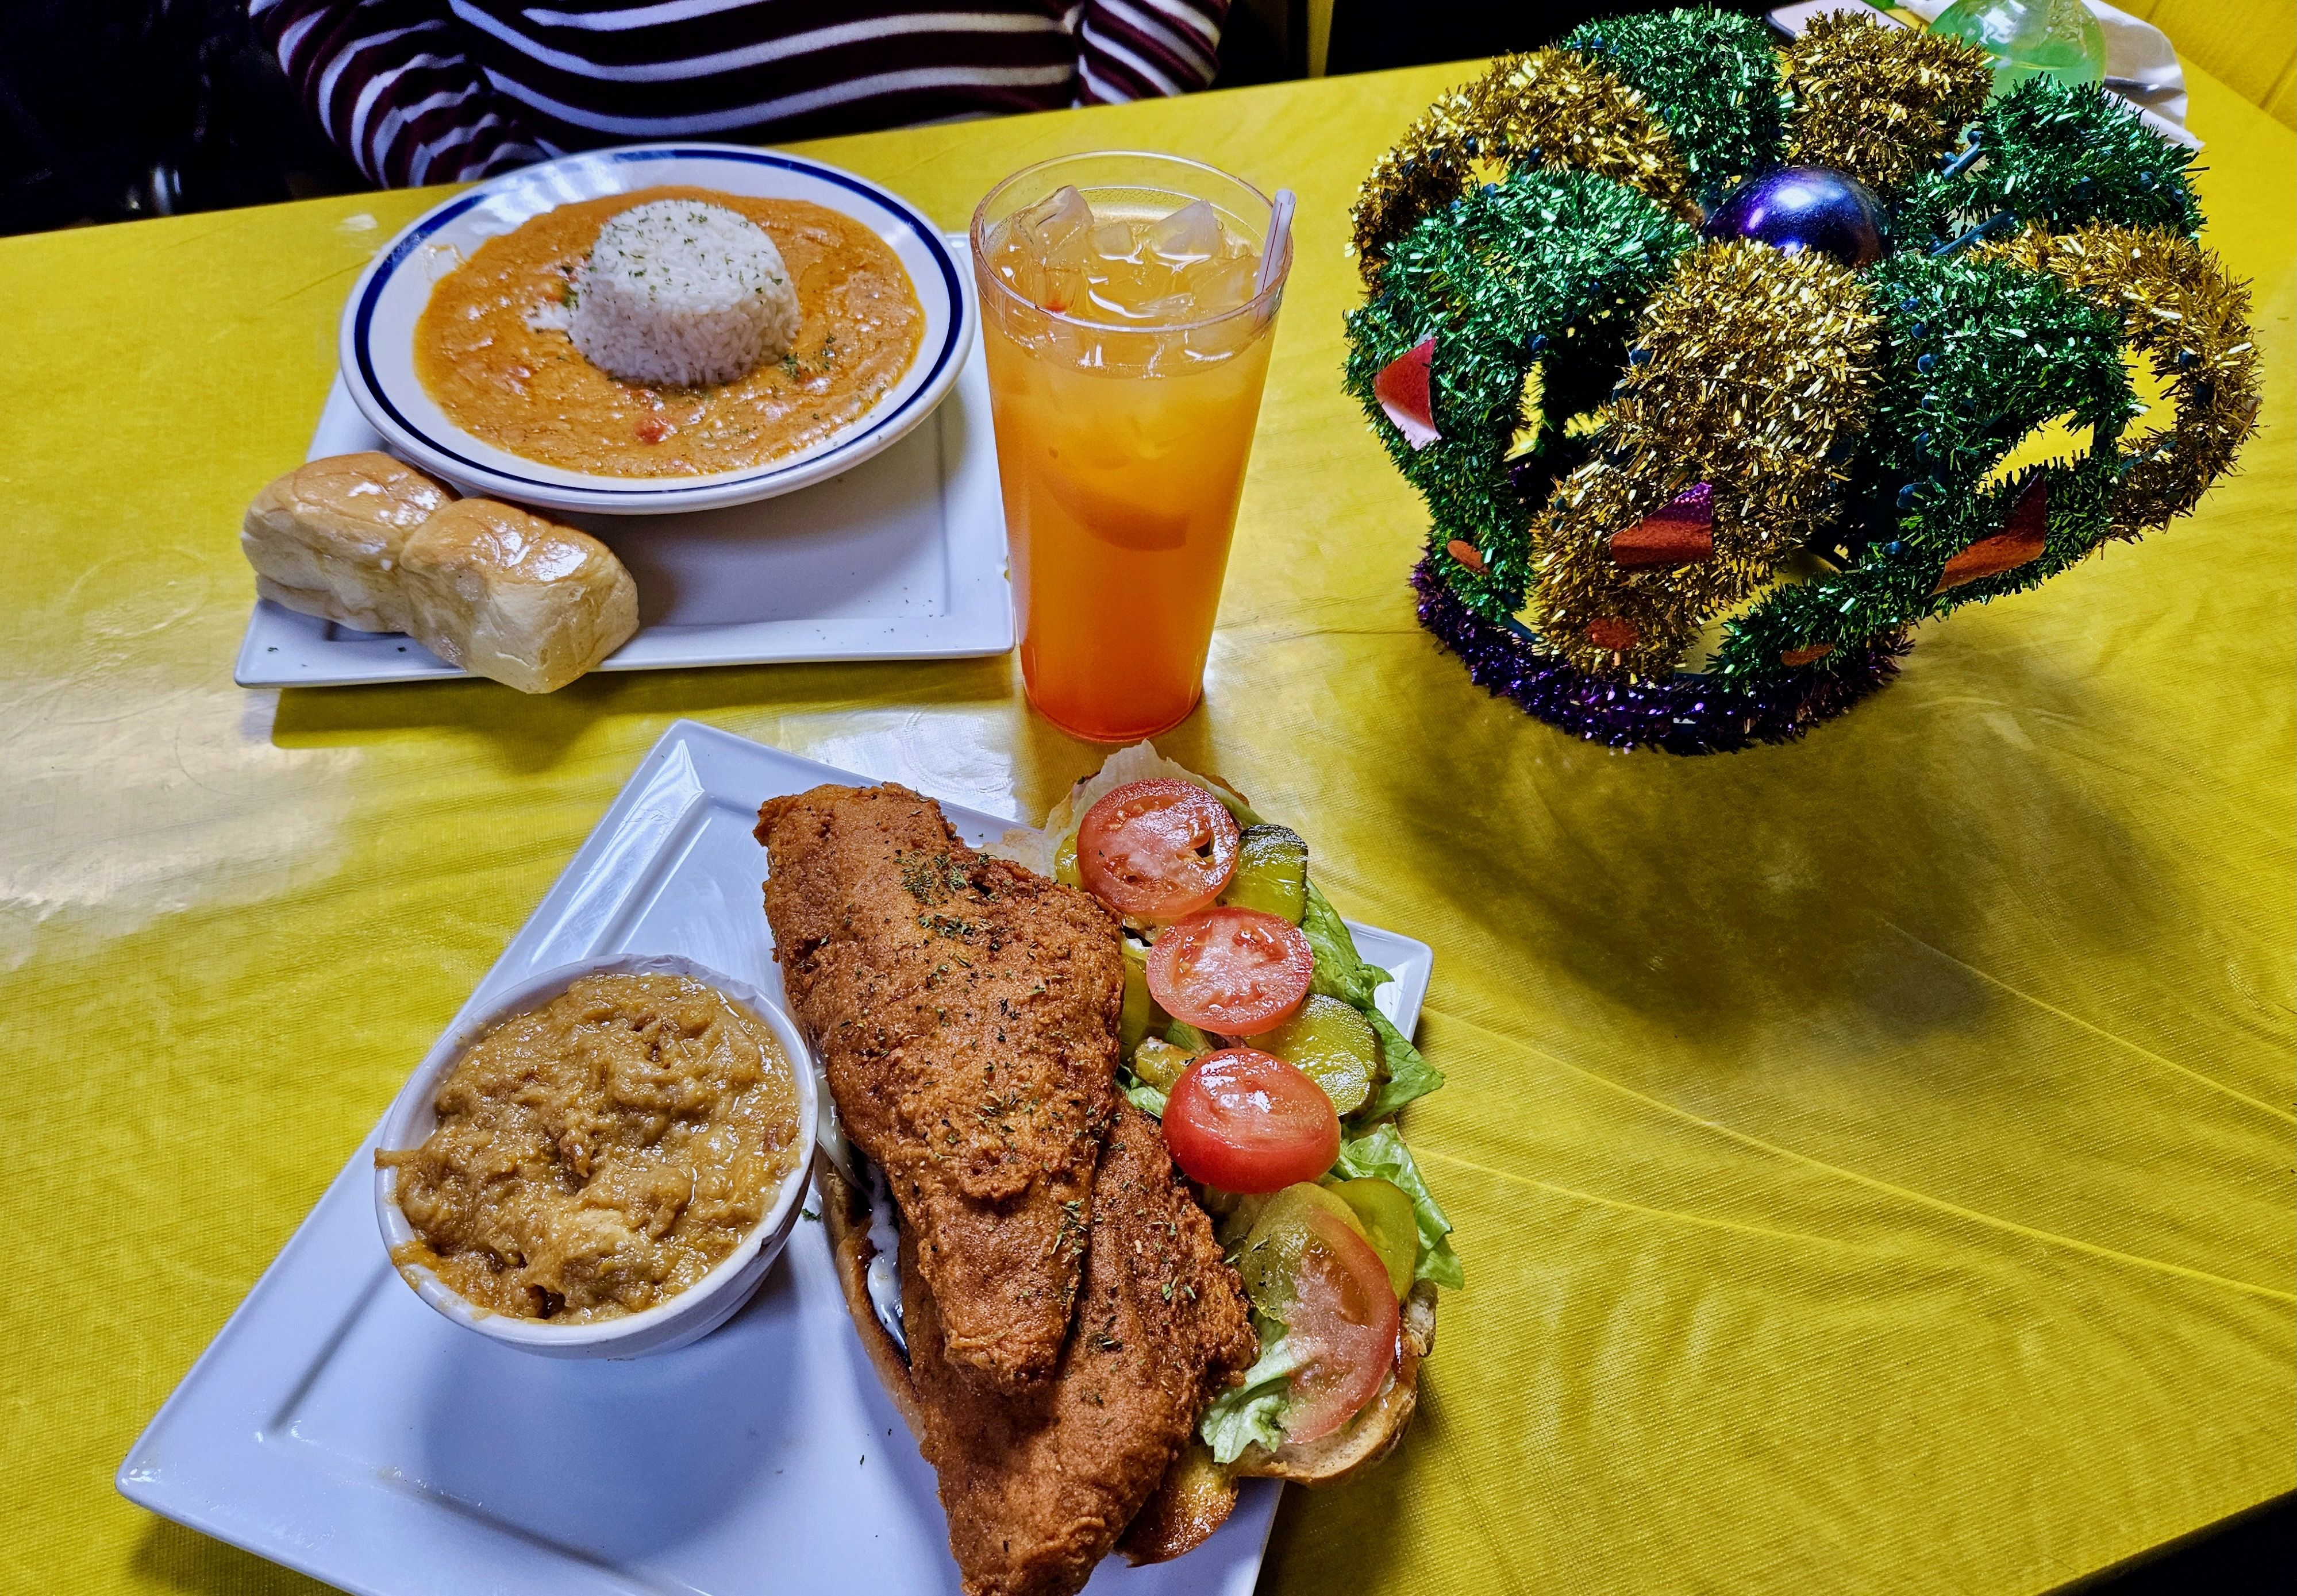 Two white plates (with a po'boy and crawfish étoufée) on a yellow tablecloth next to a Mardis Gras crown decoration and glass of punch